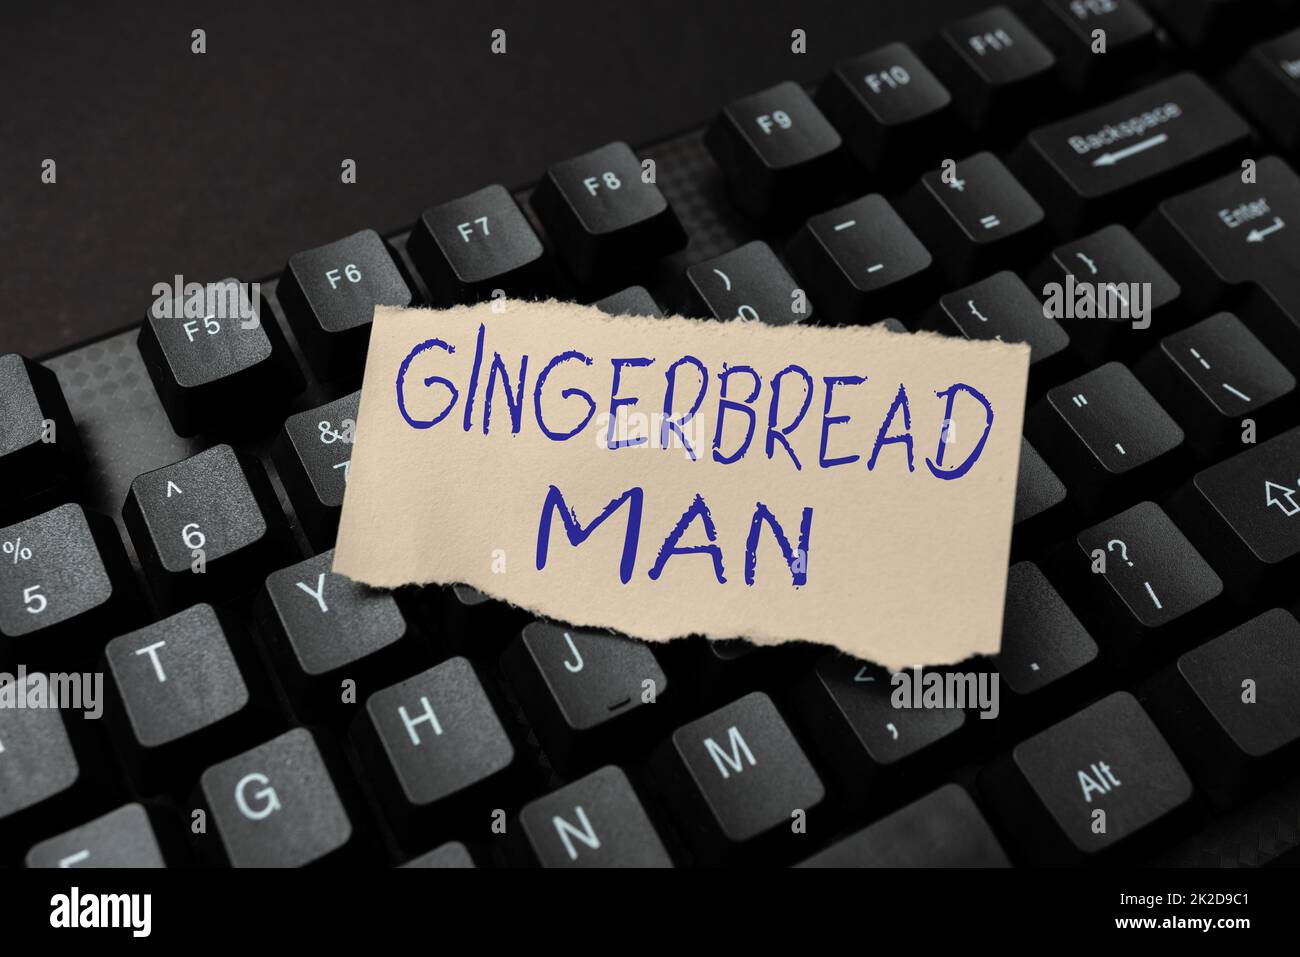 Writing displaying text Gingerbread Man. Business concept cookie made of gingerbread usually in the shape of human Writing Complaint On Social Media, Reporting Bad Online Behavior Stock Photo